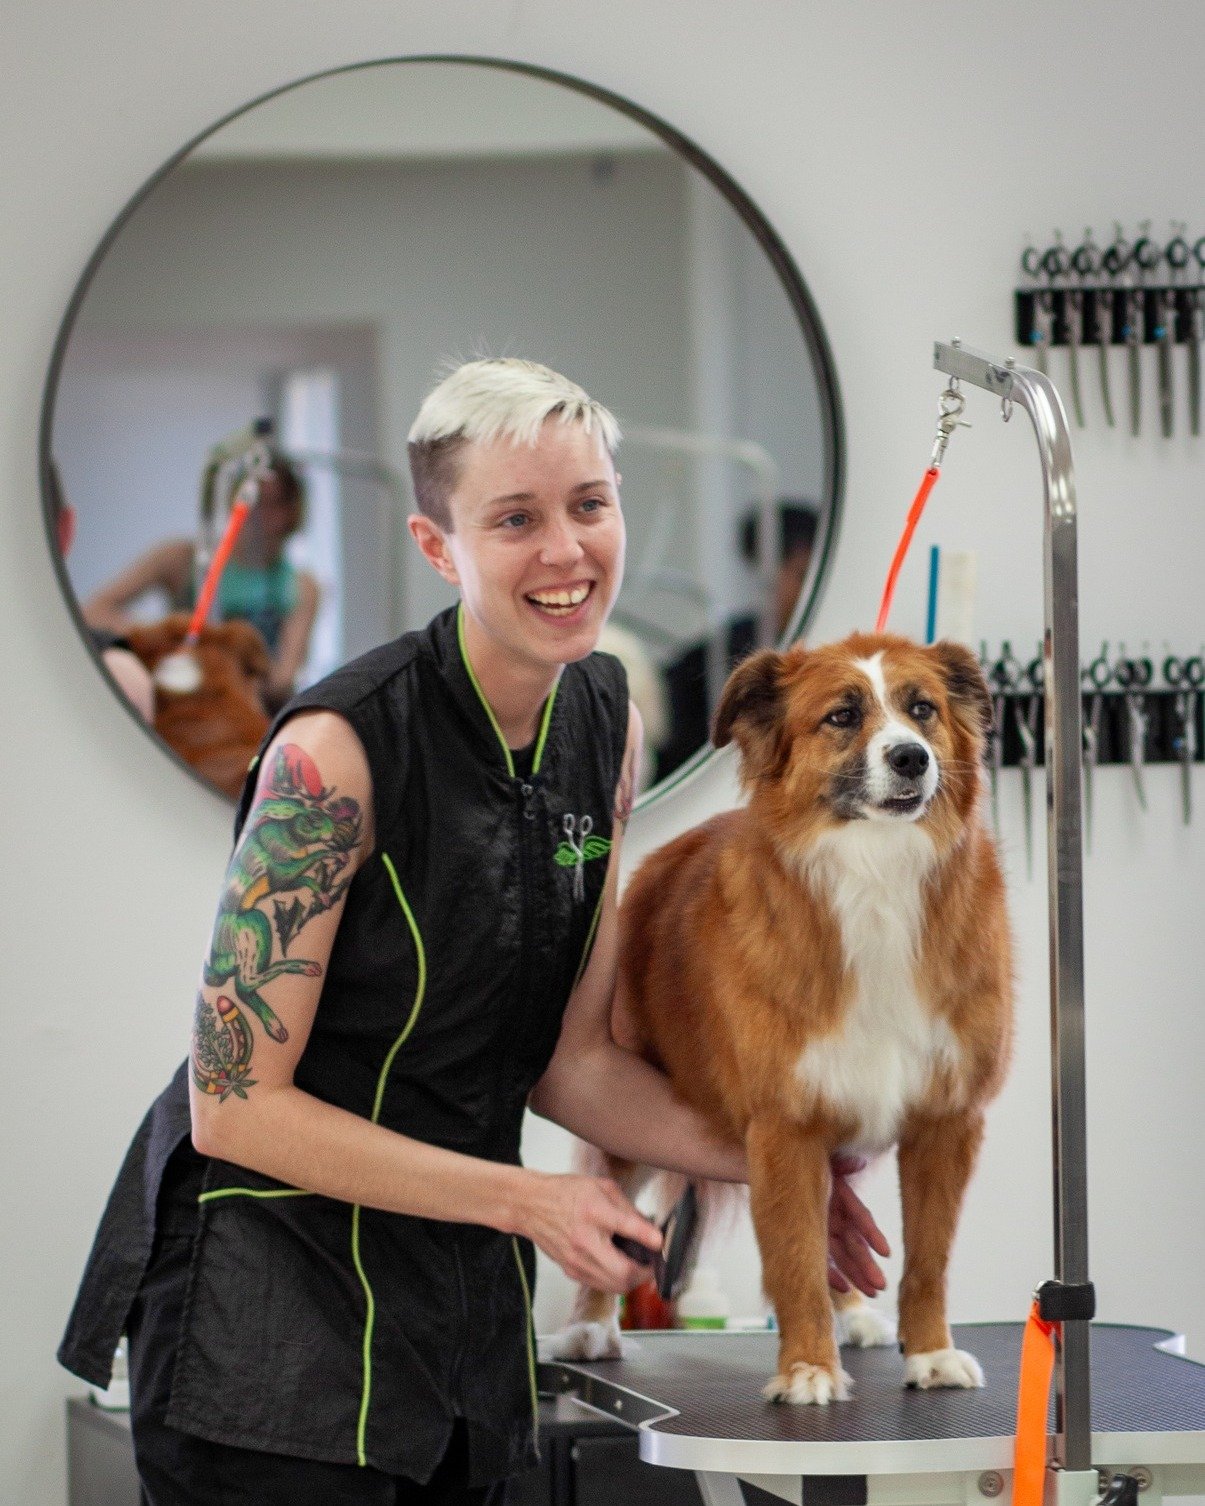 Smiles, wagging tails, and a job I adore &ndash; what more could a groomer ask for? 🐾😊 #GroomerLife #tailoredtailsoflubbock #doggrooming #Lubbocktx #lubbockdoggroomers